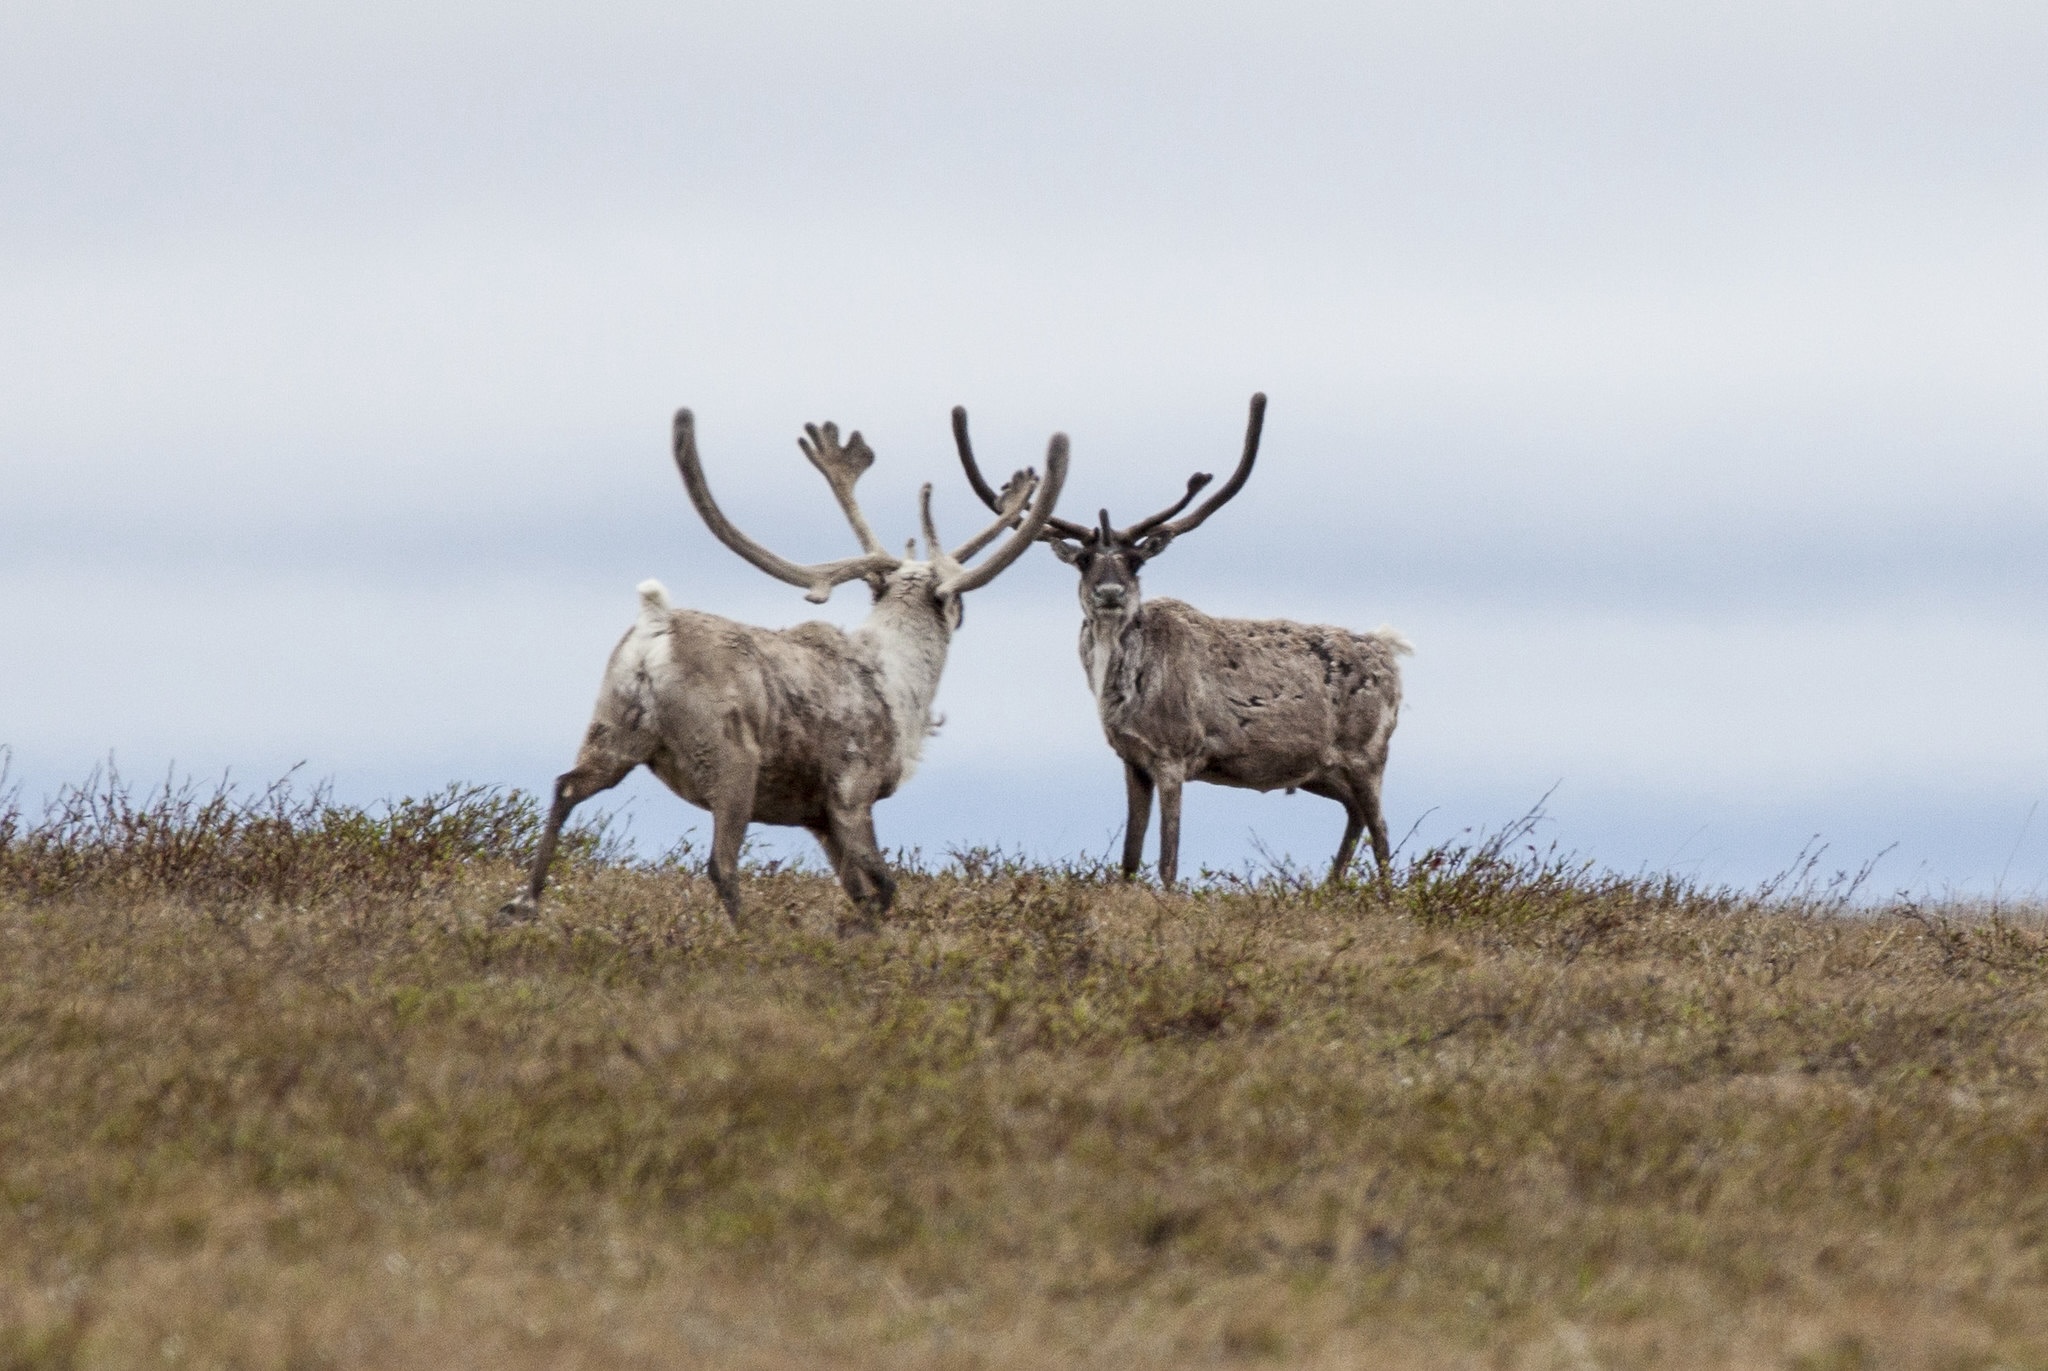 A pair of caribou with antlers face off on a tundra hillock.